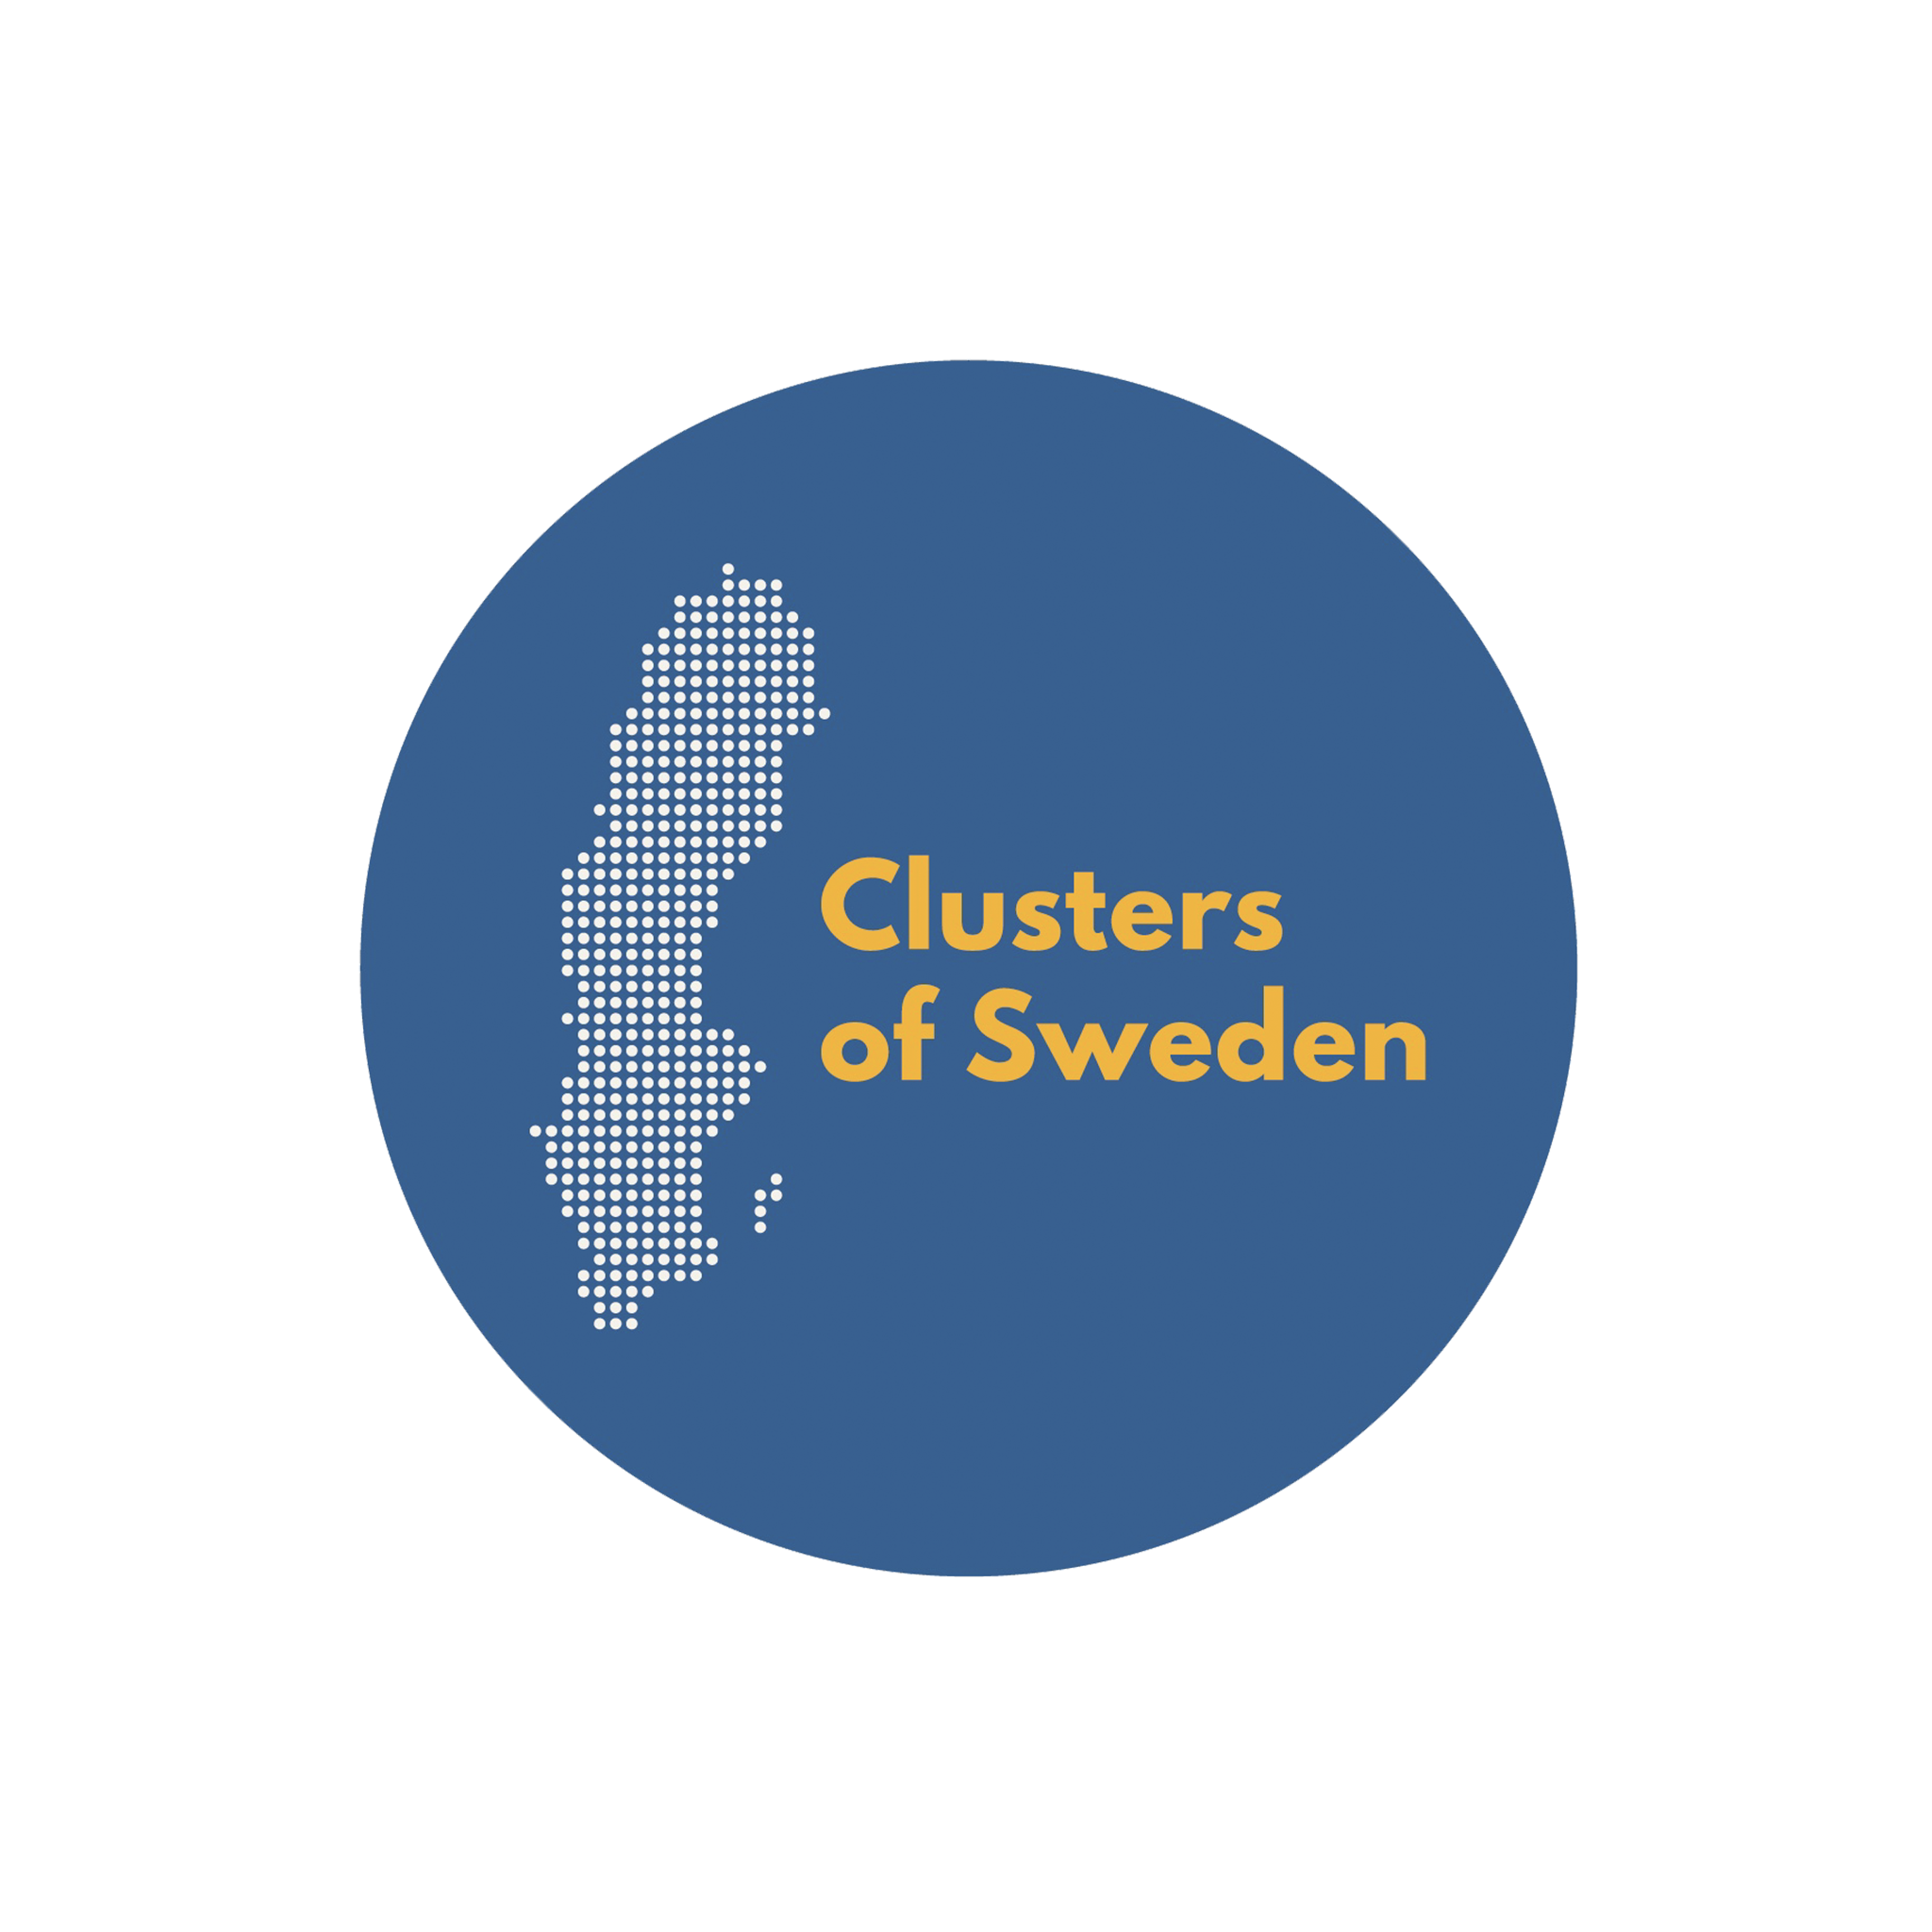 Clusters of Sweden logo in blue and yellow